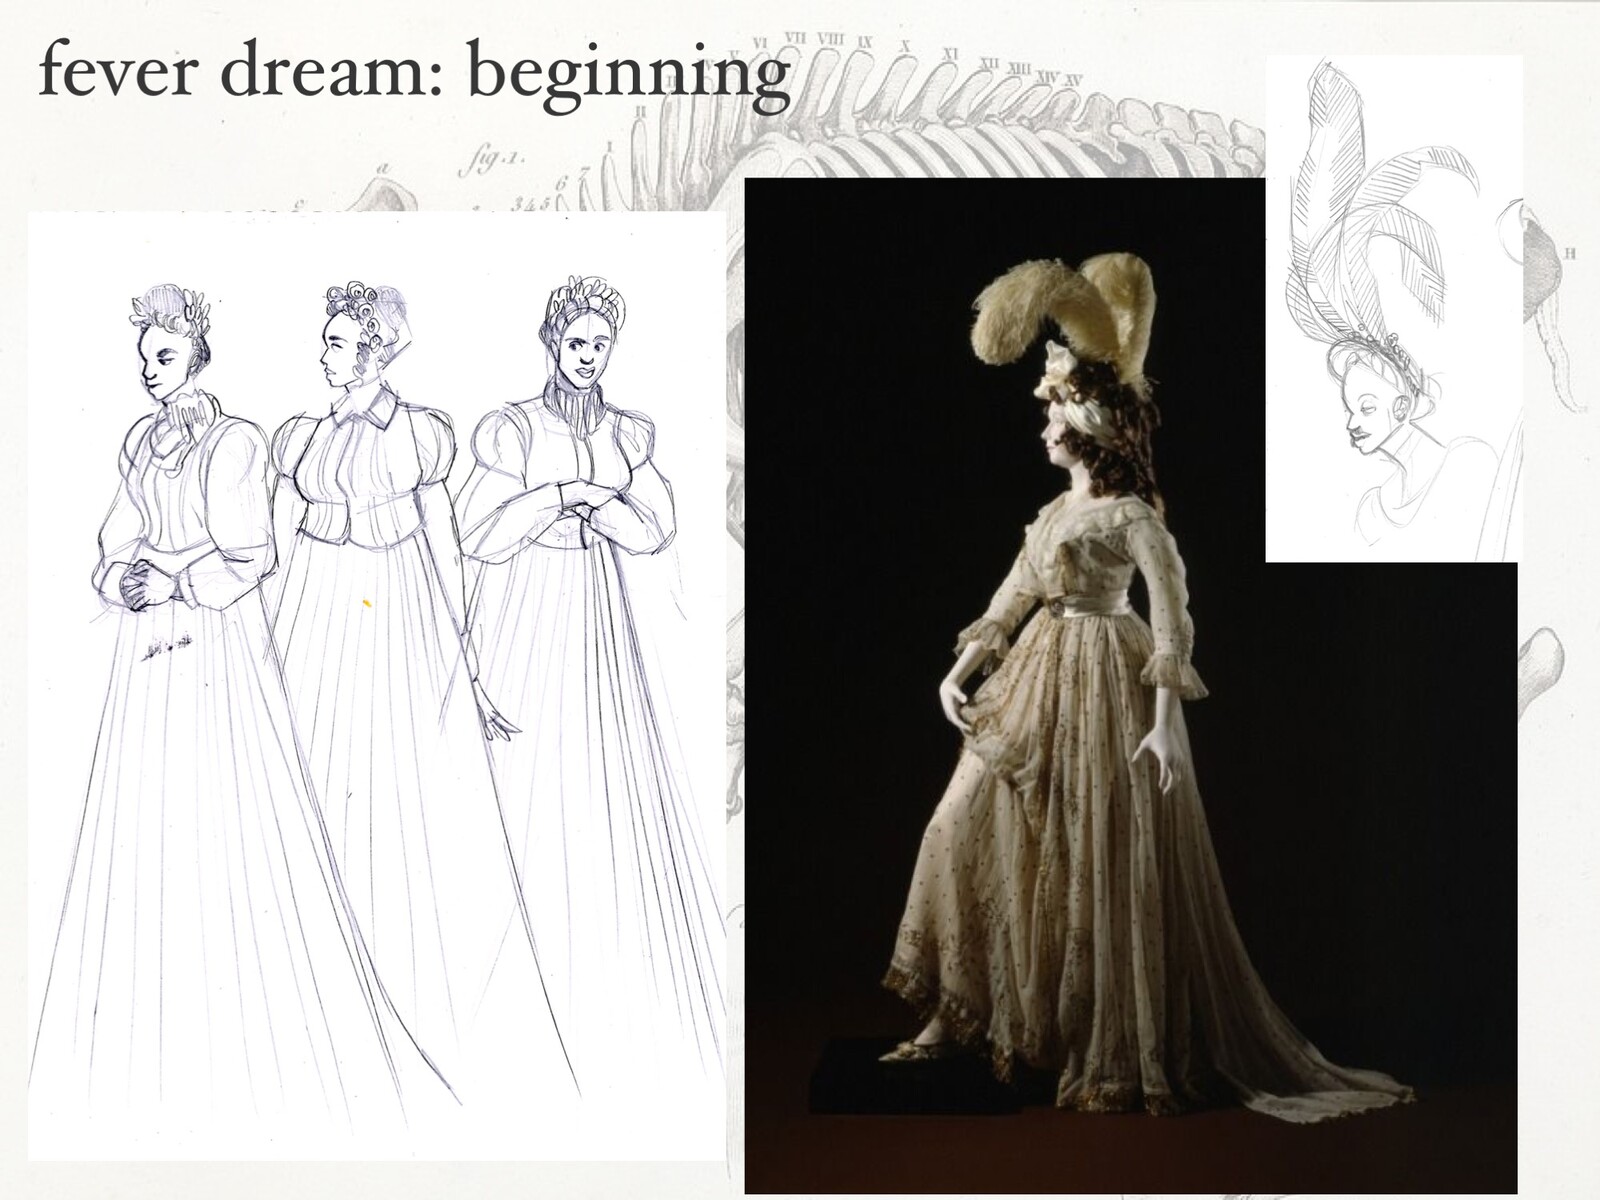 Dream Dancer: reference. 1810s ballgowns, ghostly chiffon fabric and feathers. All built for movement and disorientation on stage. 